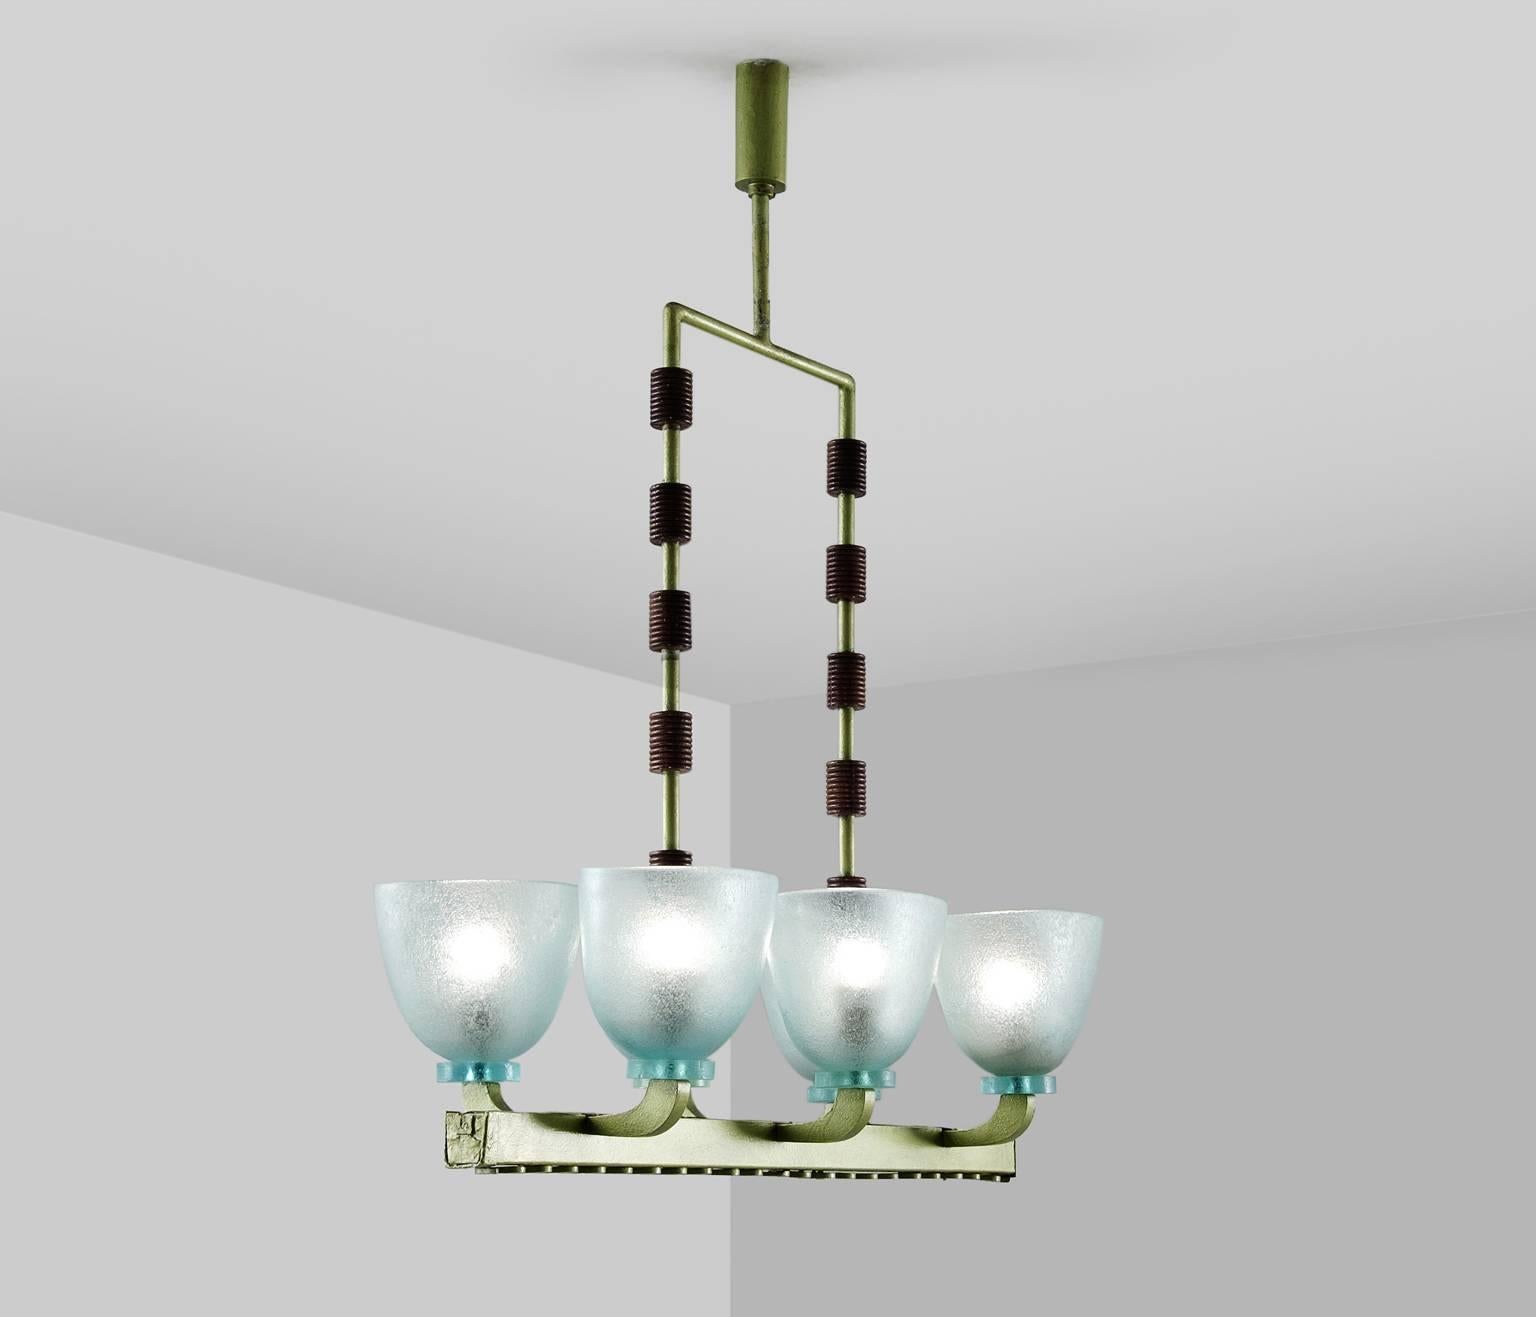 Chandelier in Murano glass, wood and metal by Seguso, Italy, 1940s. 

Large Murano glass chandelier by Seguso. This wonderful chandelier has a soft green frame in metal, with wooden decorative cylinder shaped elements onto the vertical tubular